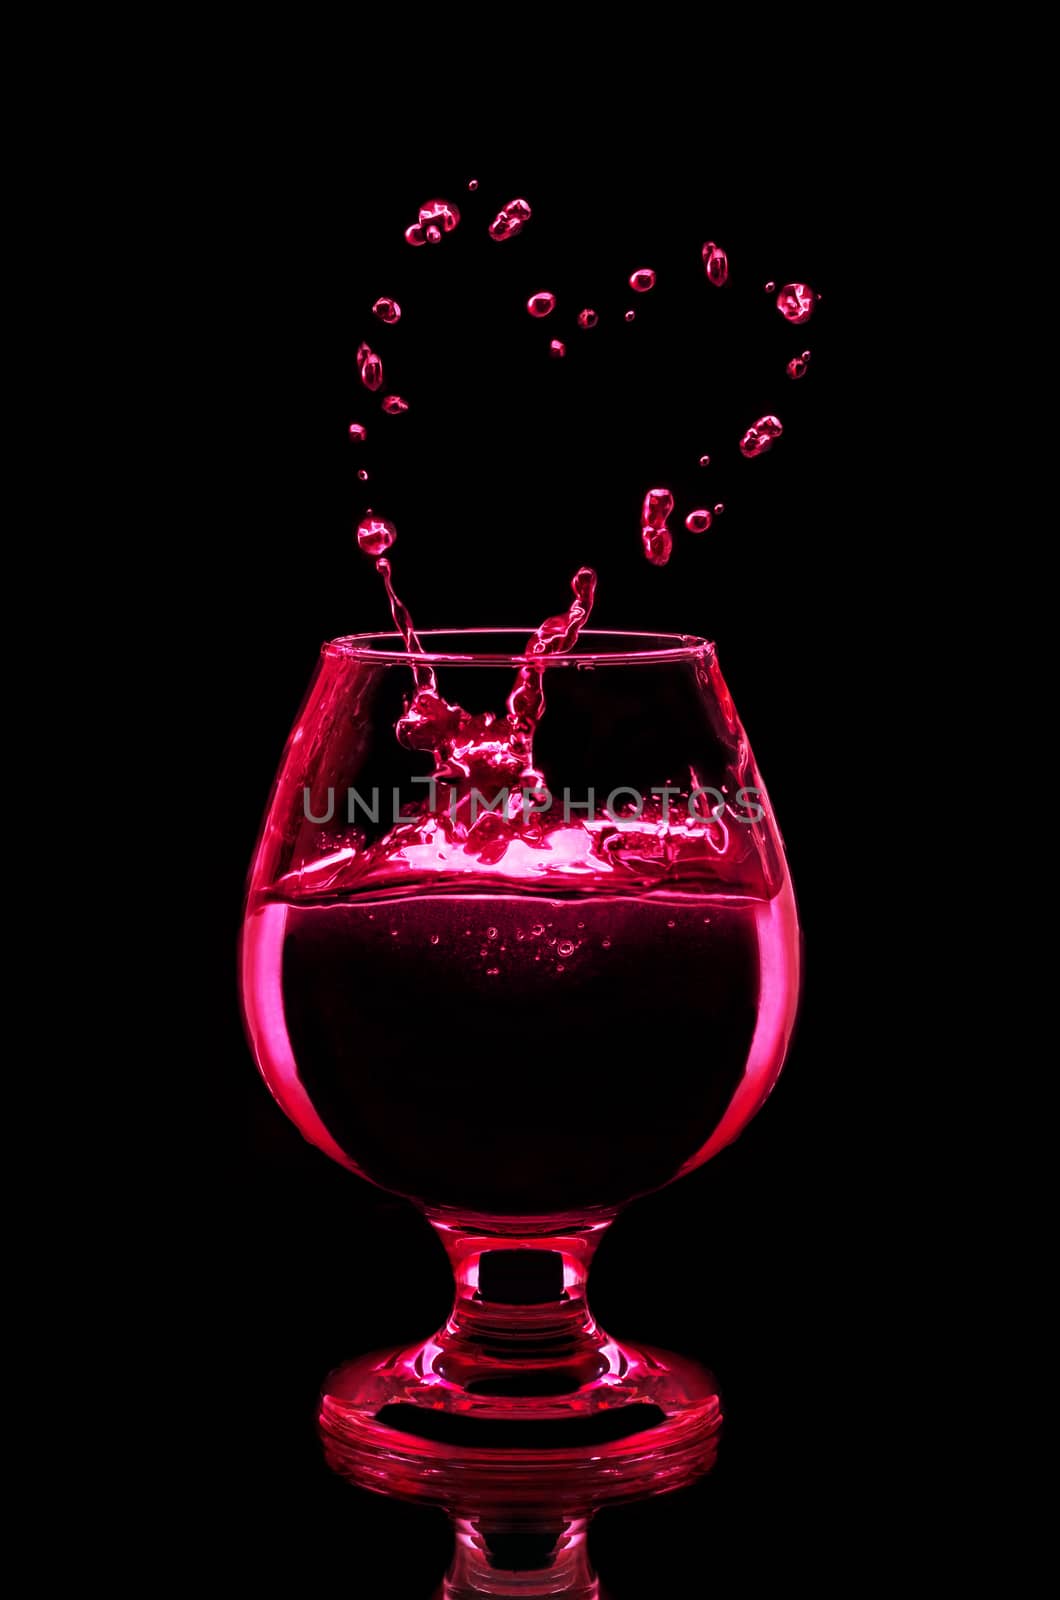 Cocktail in glass on black background by Gaina